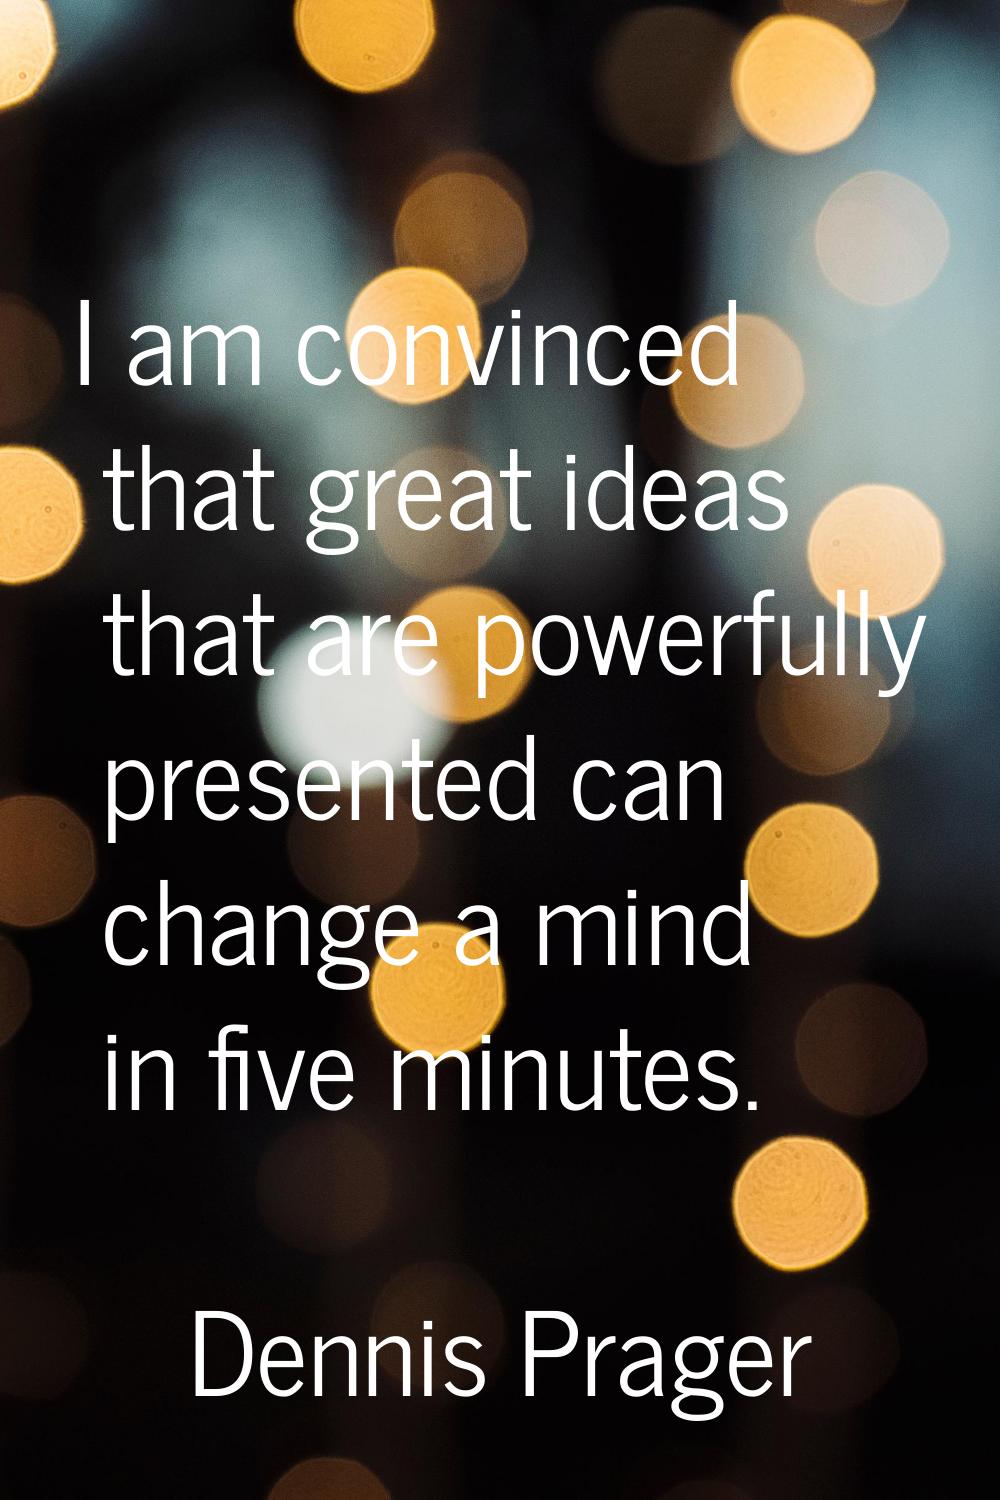 I am convinced that great ideas that are powerfully presented can change a mind in five minutes.